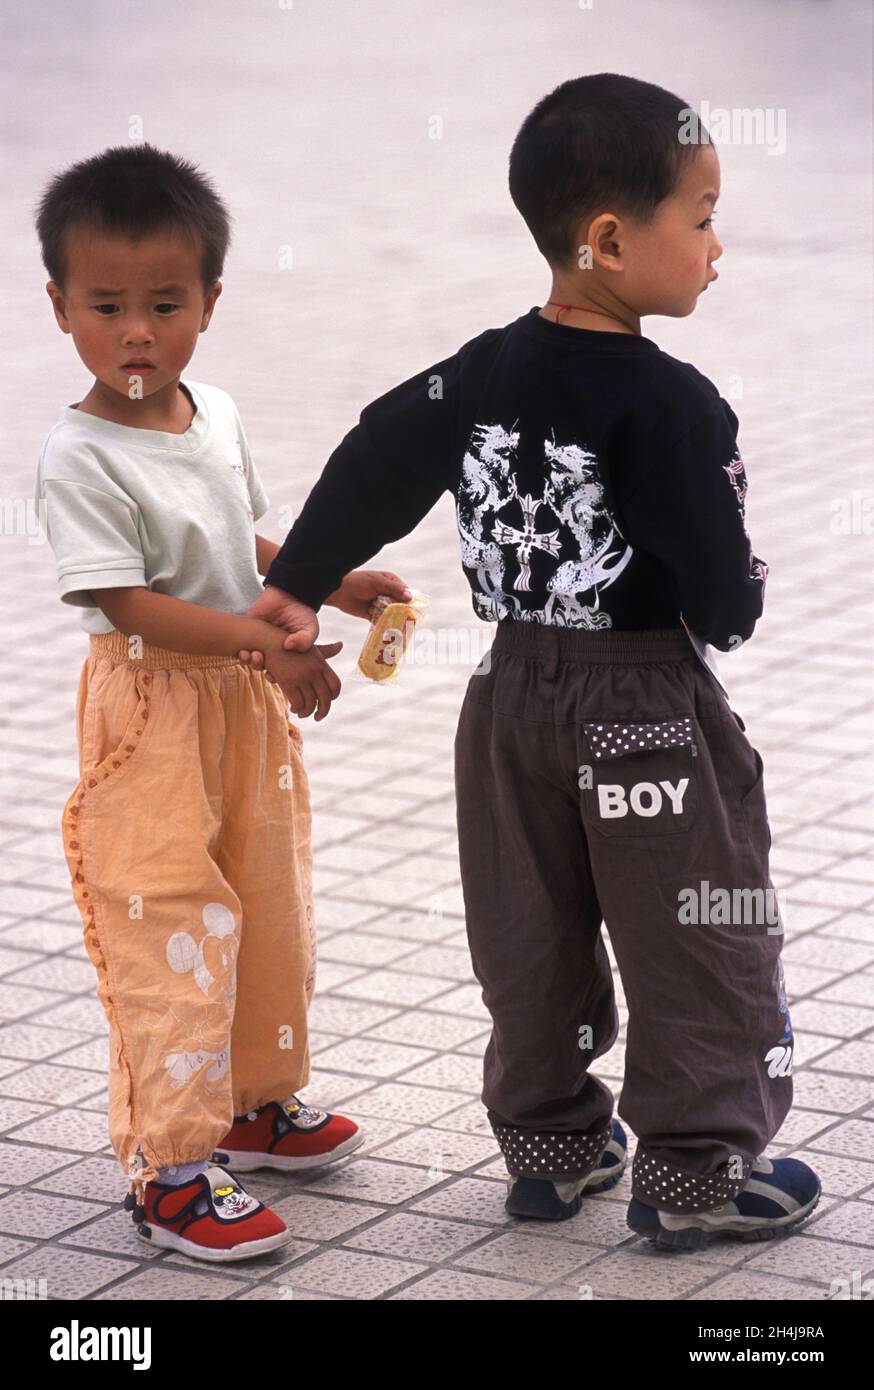 China 2000s. Two young Chinese boys wearing western style designer label clothes. On the trousers of one of them is the logo 'Boy'. Hangzhou, Zhejiang Province, China. 2000s, 2001  HOMER SYKES. Stock Photo